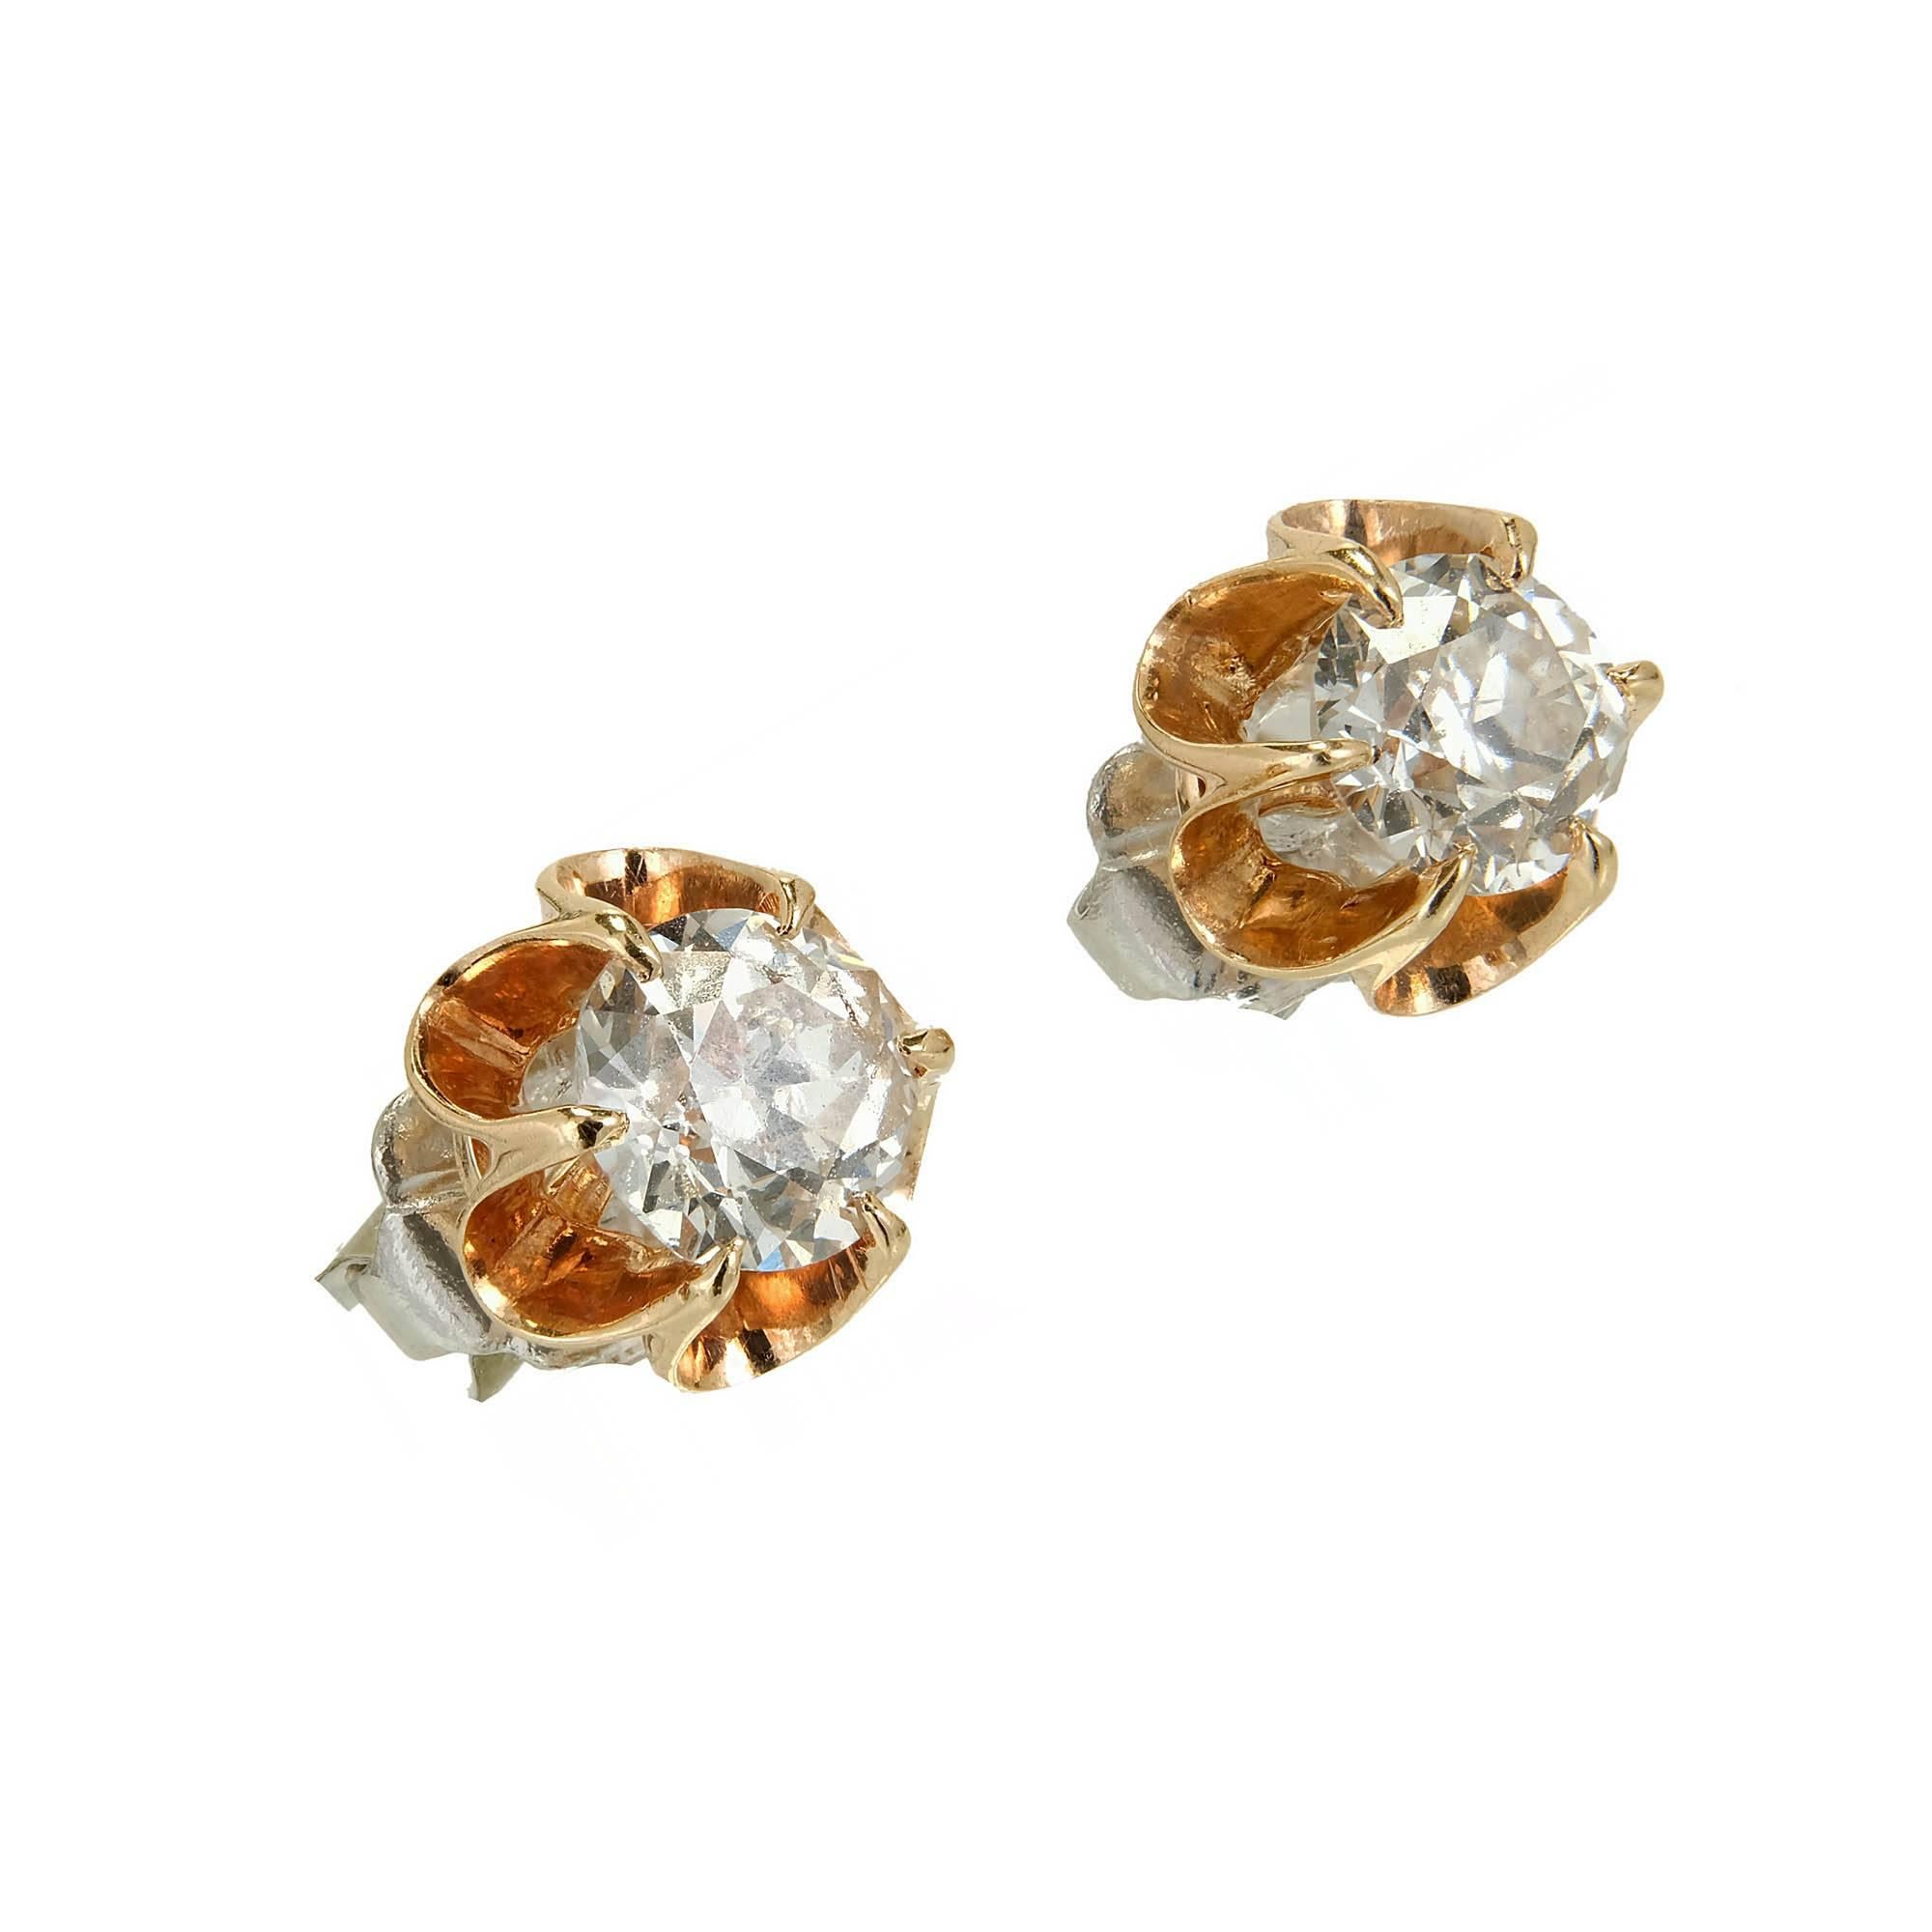 Victorian 1910 - 1920 scalloped 14k rose gold earrings with extra bright sparkly European cut diamonds and Platinum posts. 

1 old European cut diamond, approx. total weight .38ct, H-I, SI2, 4.69mm, Depth: 62.8% Table: 52%, EGL certificate